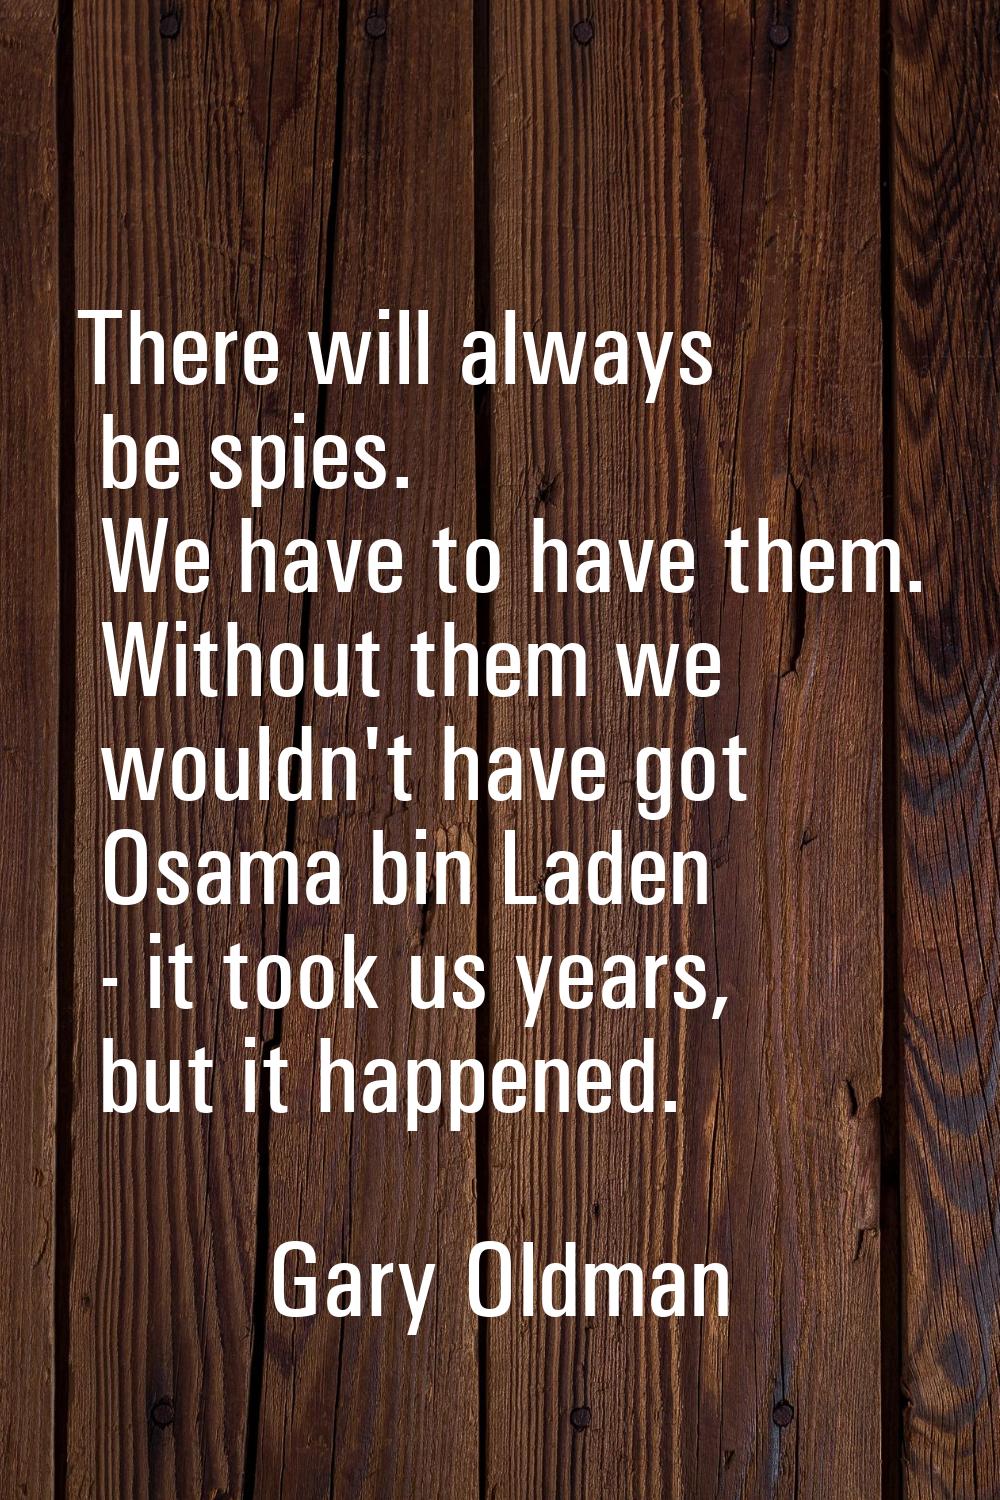 There will always be spies. We have to have them. Without them we wouldn't have got Osama bin Laden